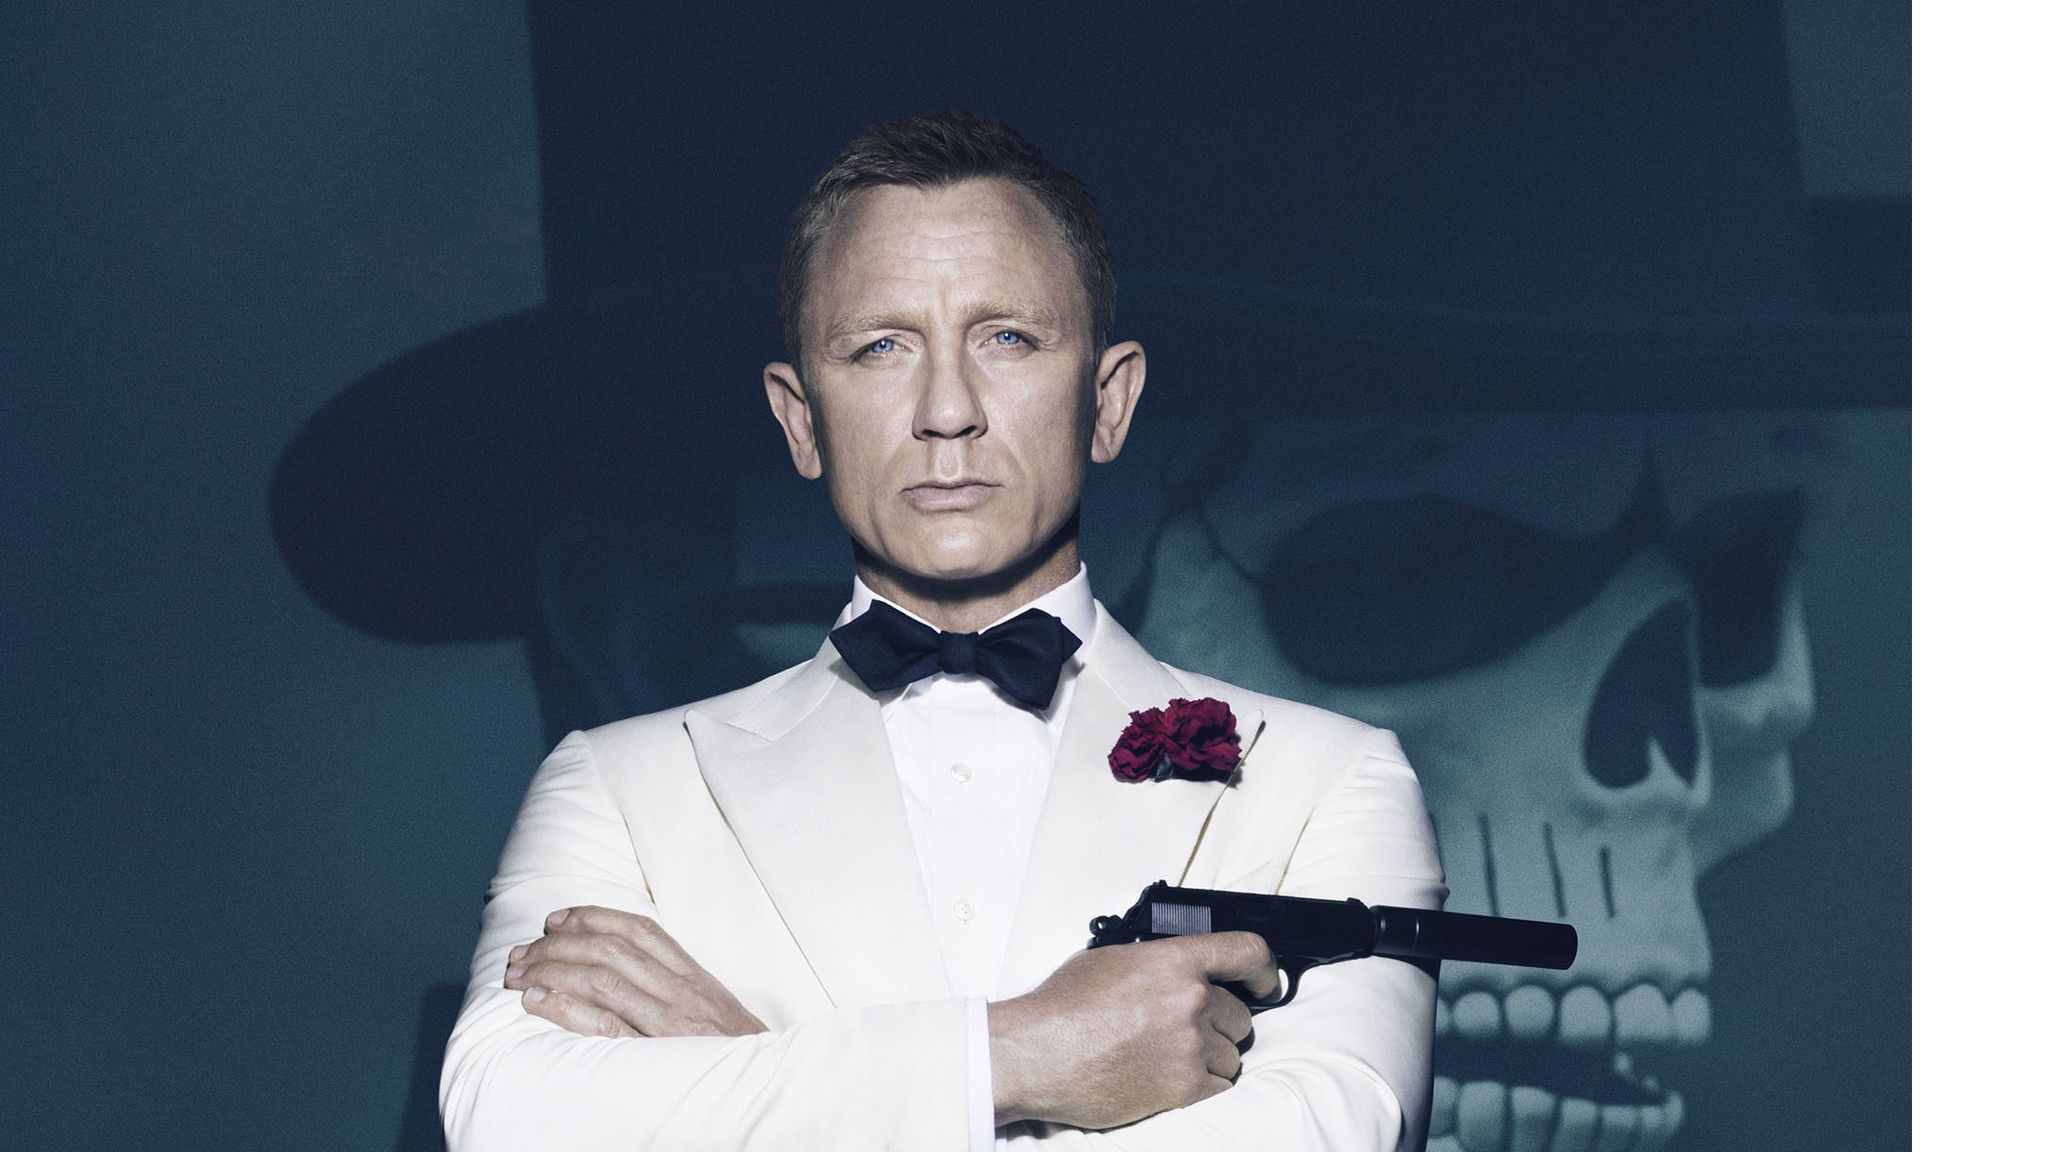 James Bond No Time To Die Revealed As Title Of Next 007 Film Ents